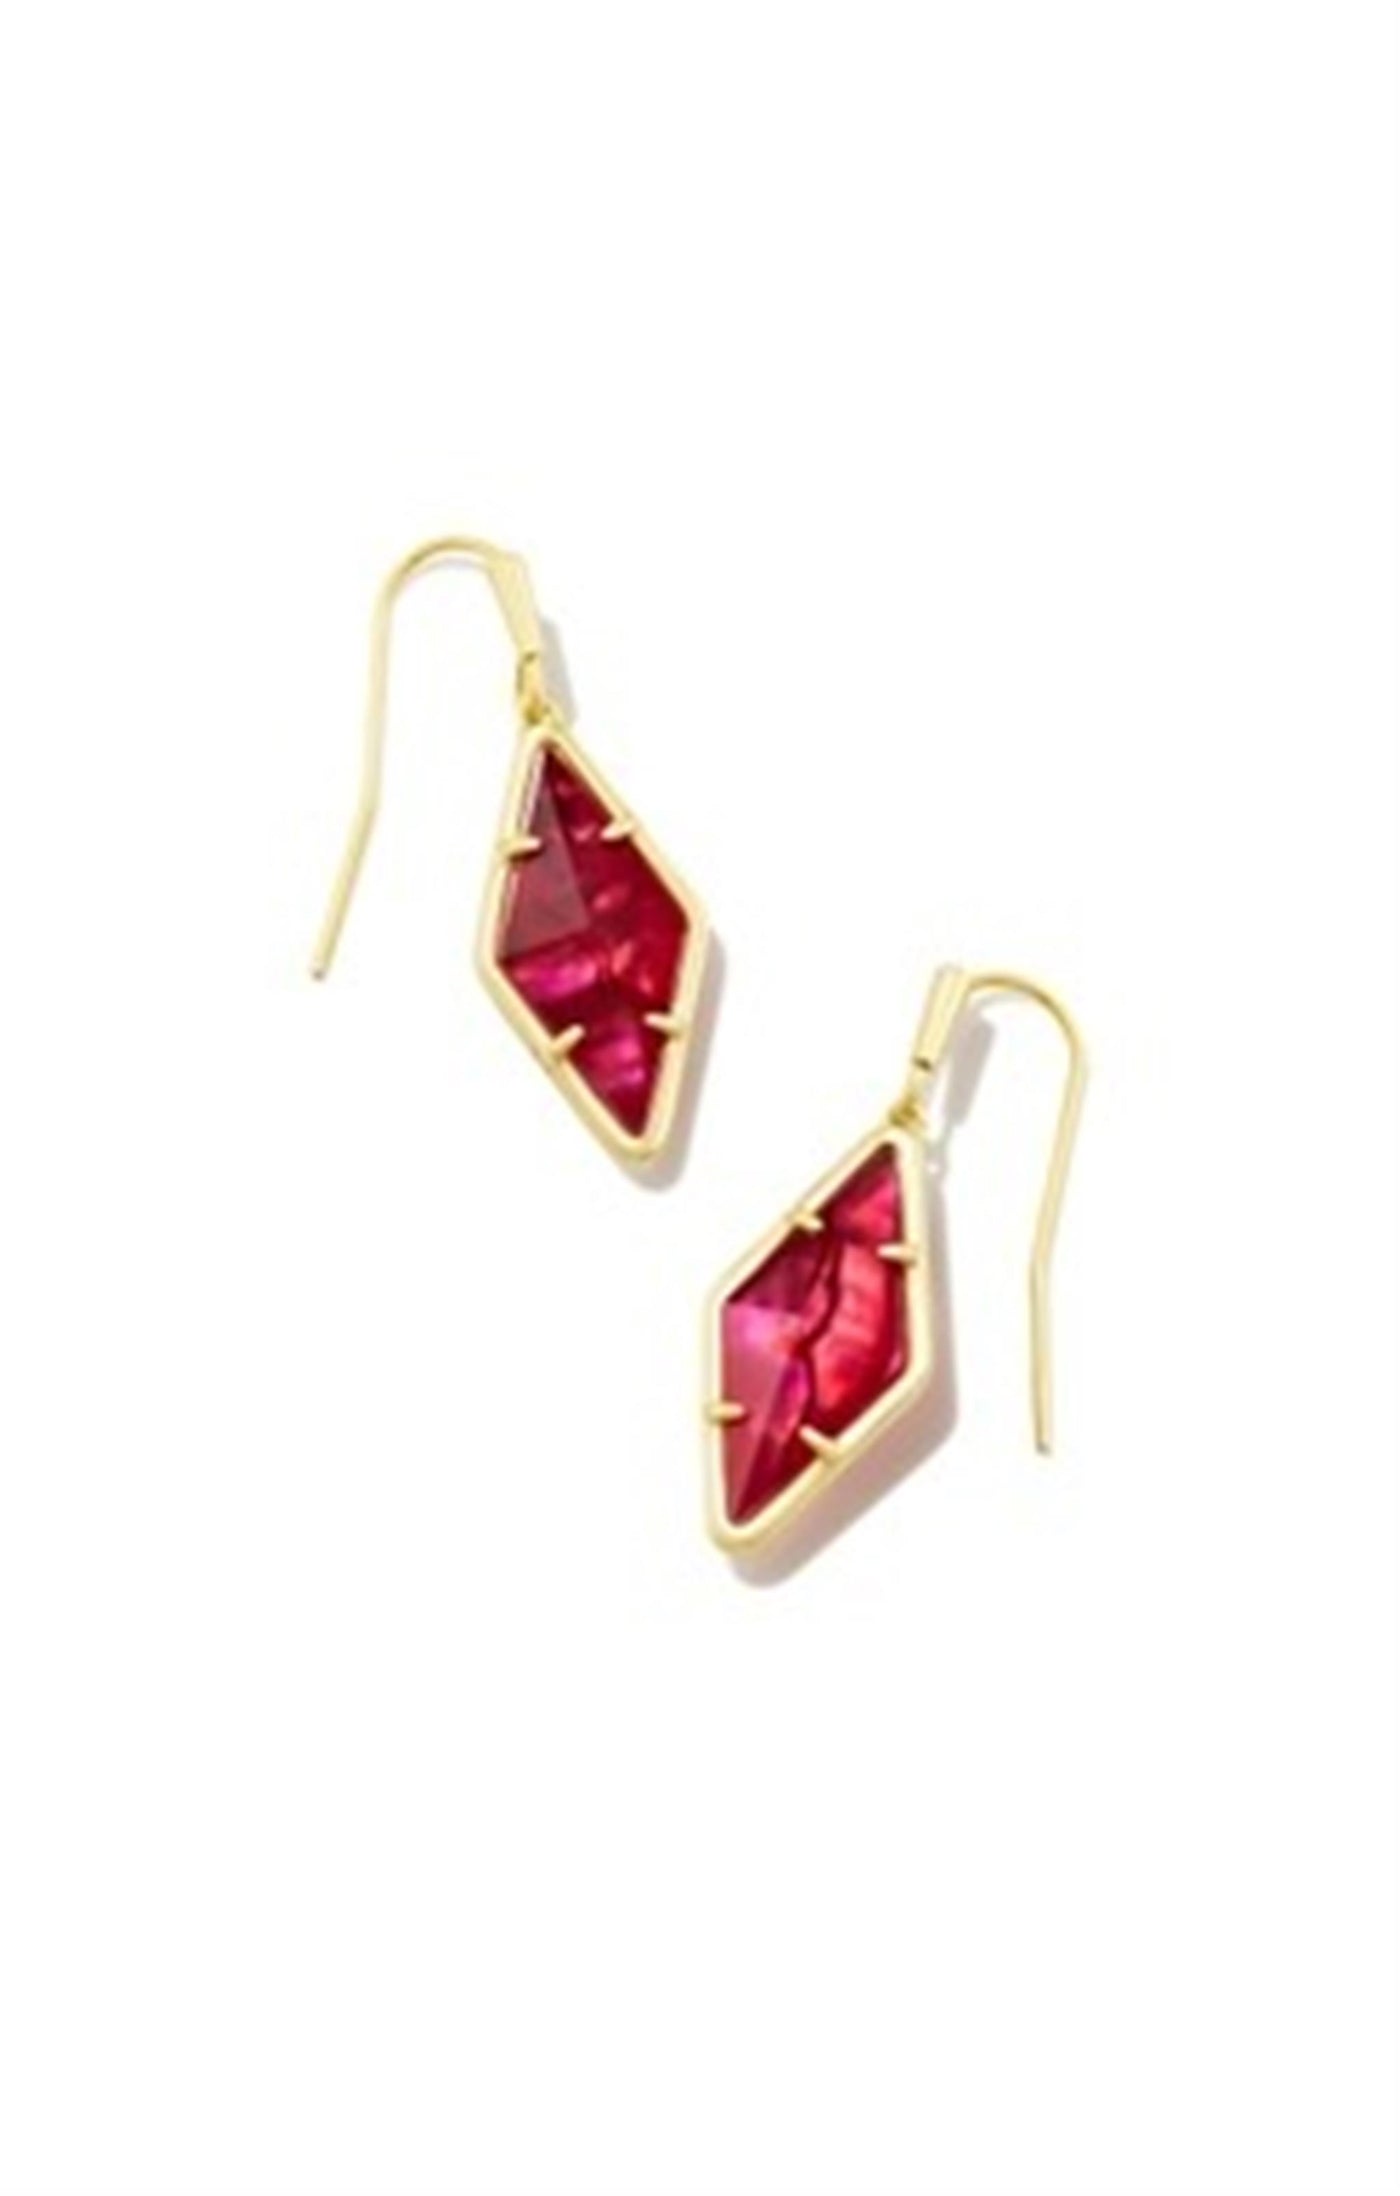 Gold Tone Earrings Featuring Raspberry Illusion by Kendra Scott